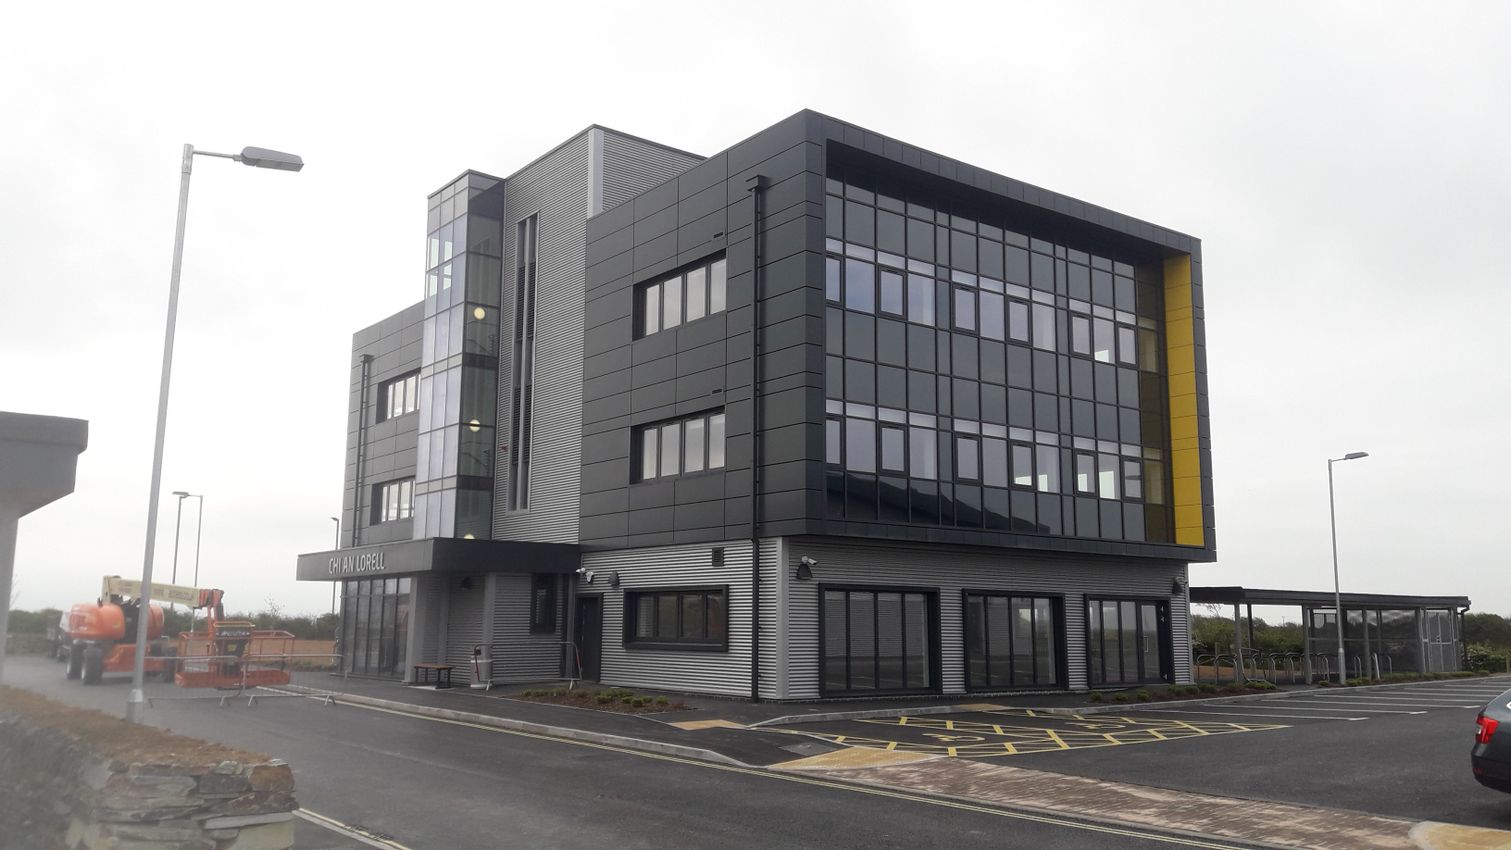 Office 6 Chi An Lorell (Satellite House), Sector 2, Aerohub Business Park, St Mawgan, Newquay, Cornwall, TR8 4JZ